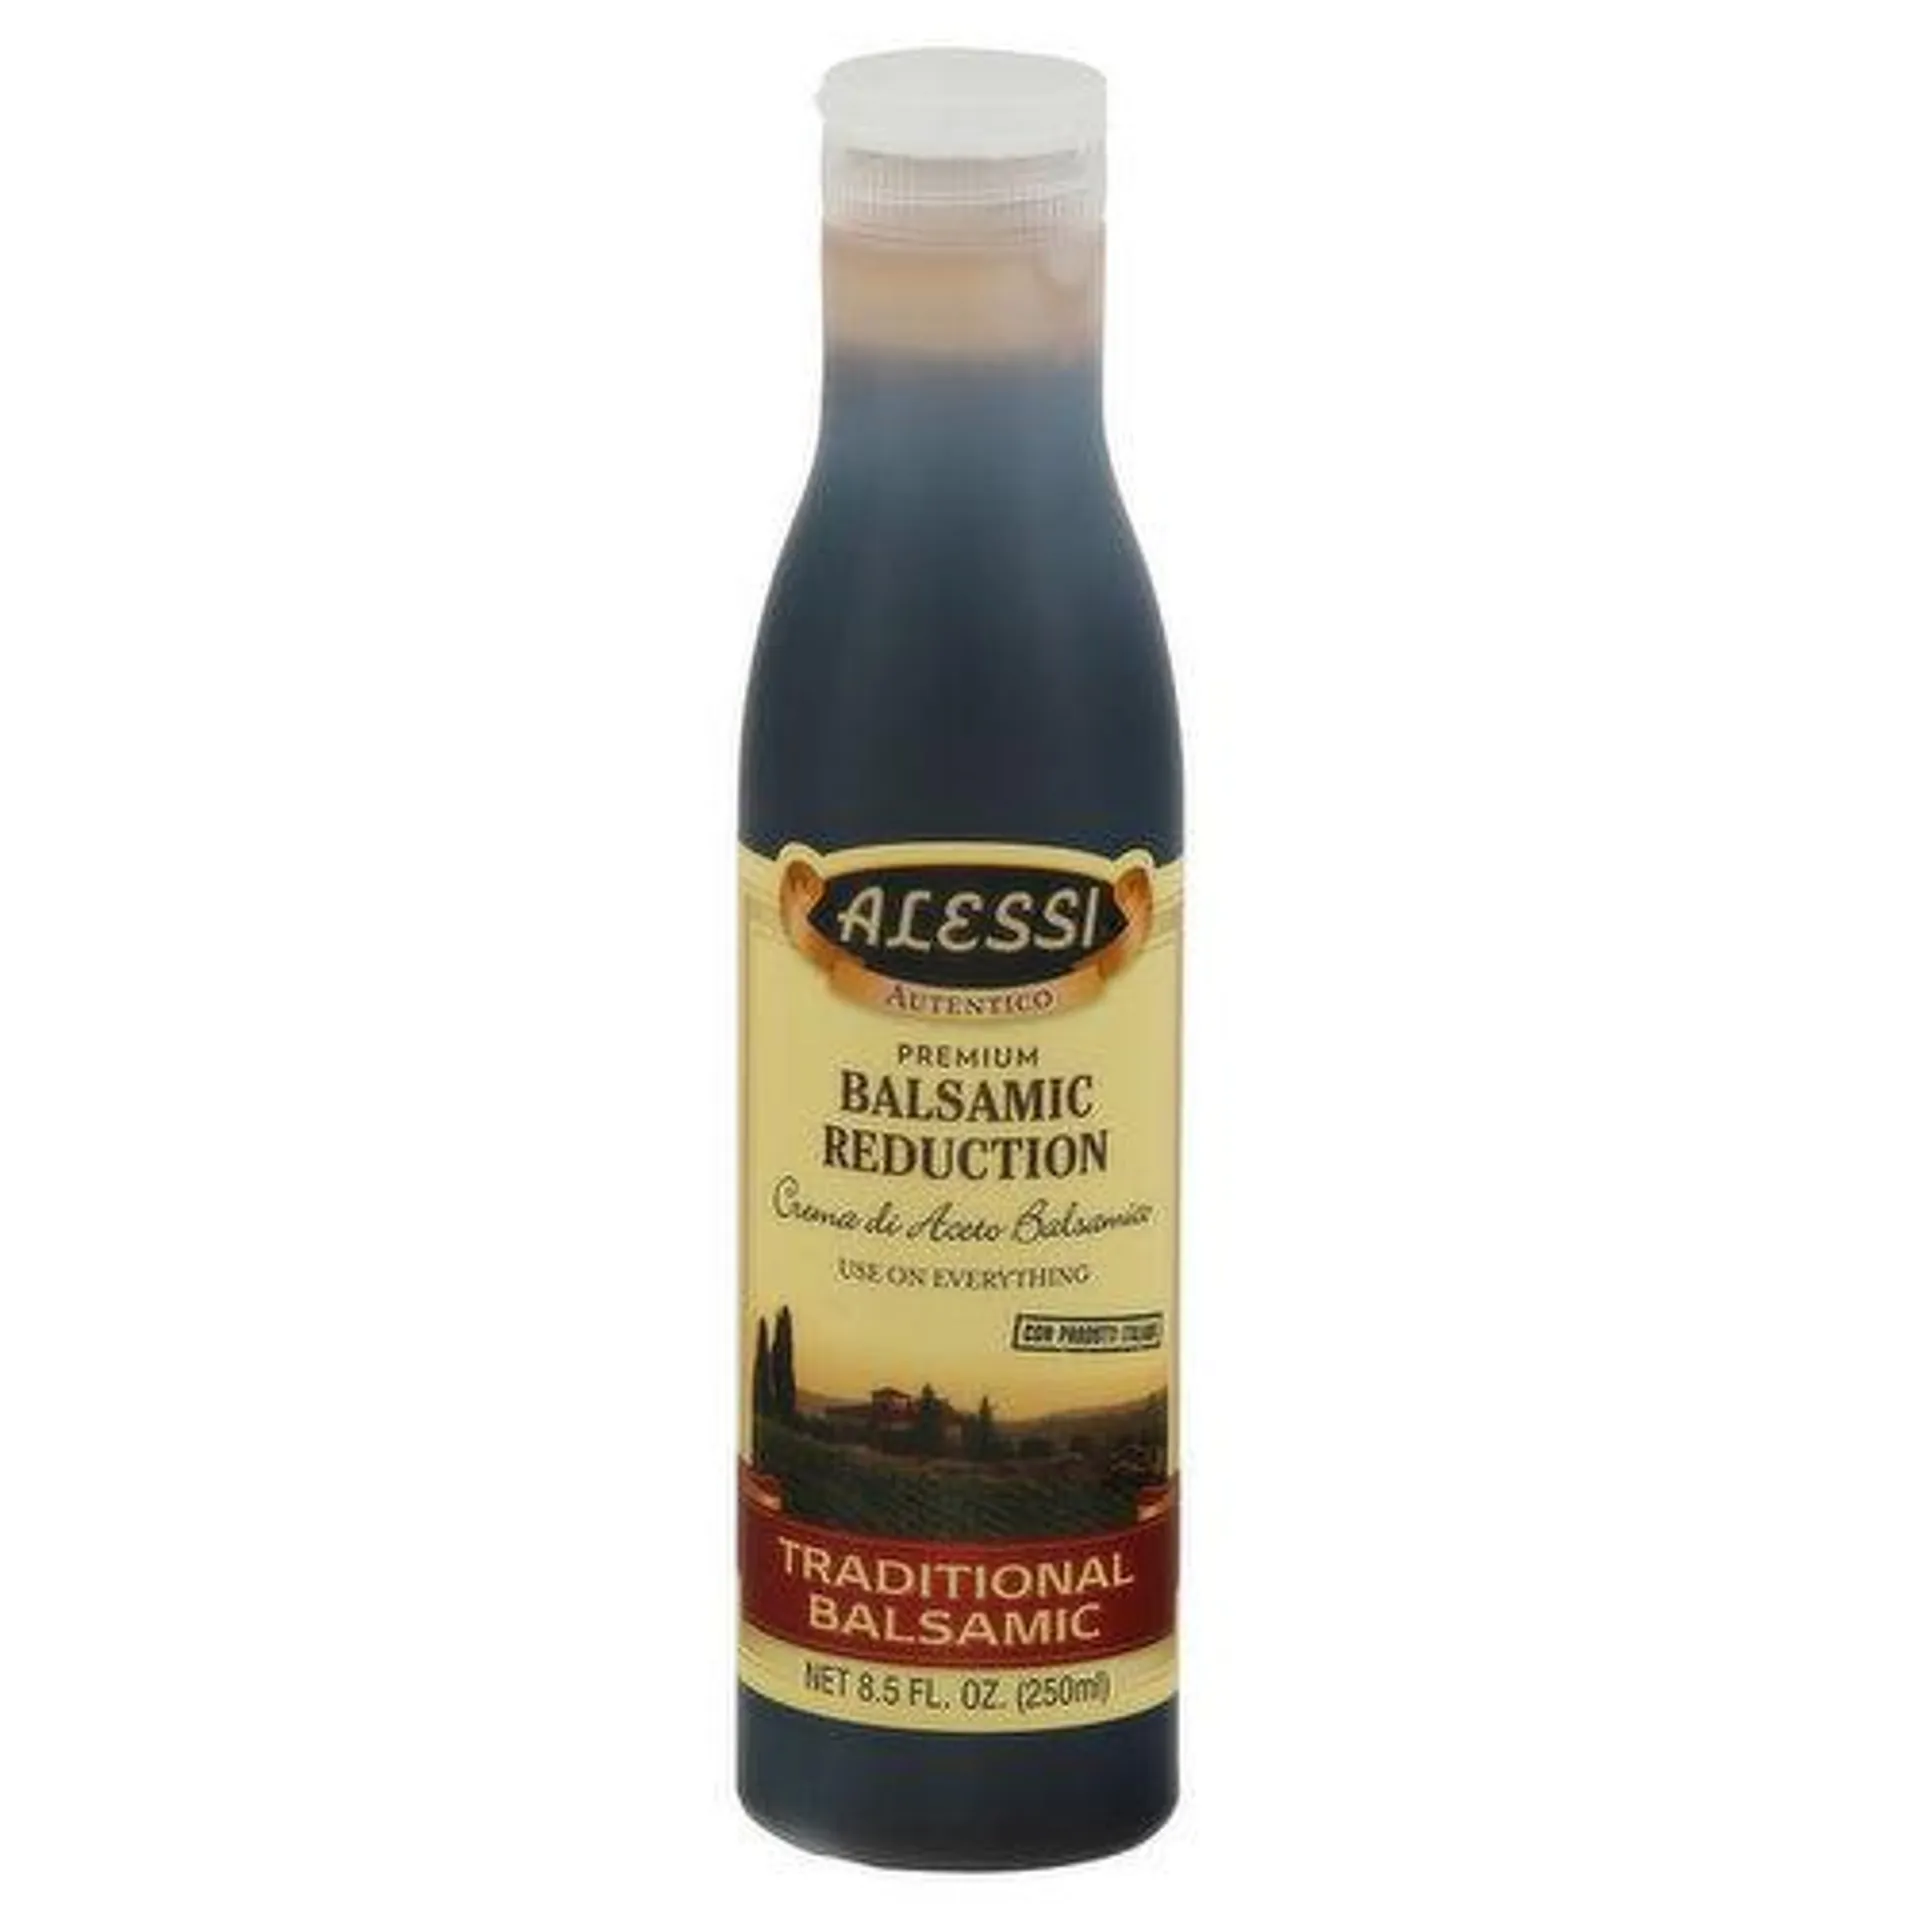 Alessi Balsamic Reduction, Premium, Traditional - 8.5 Fluid ounce